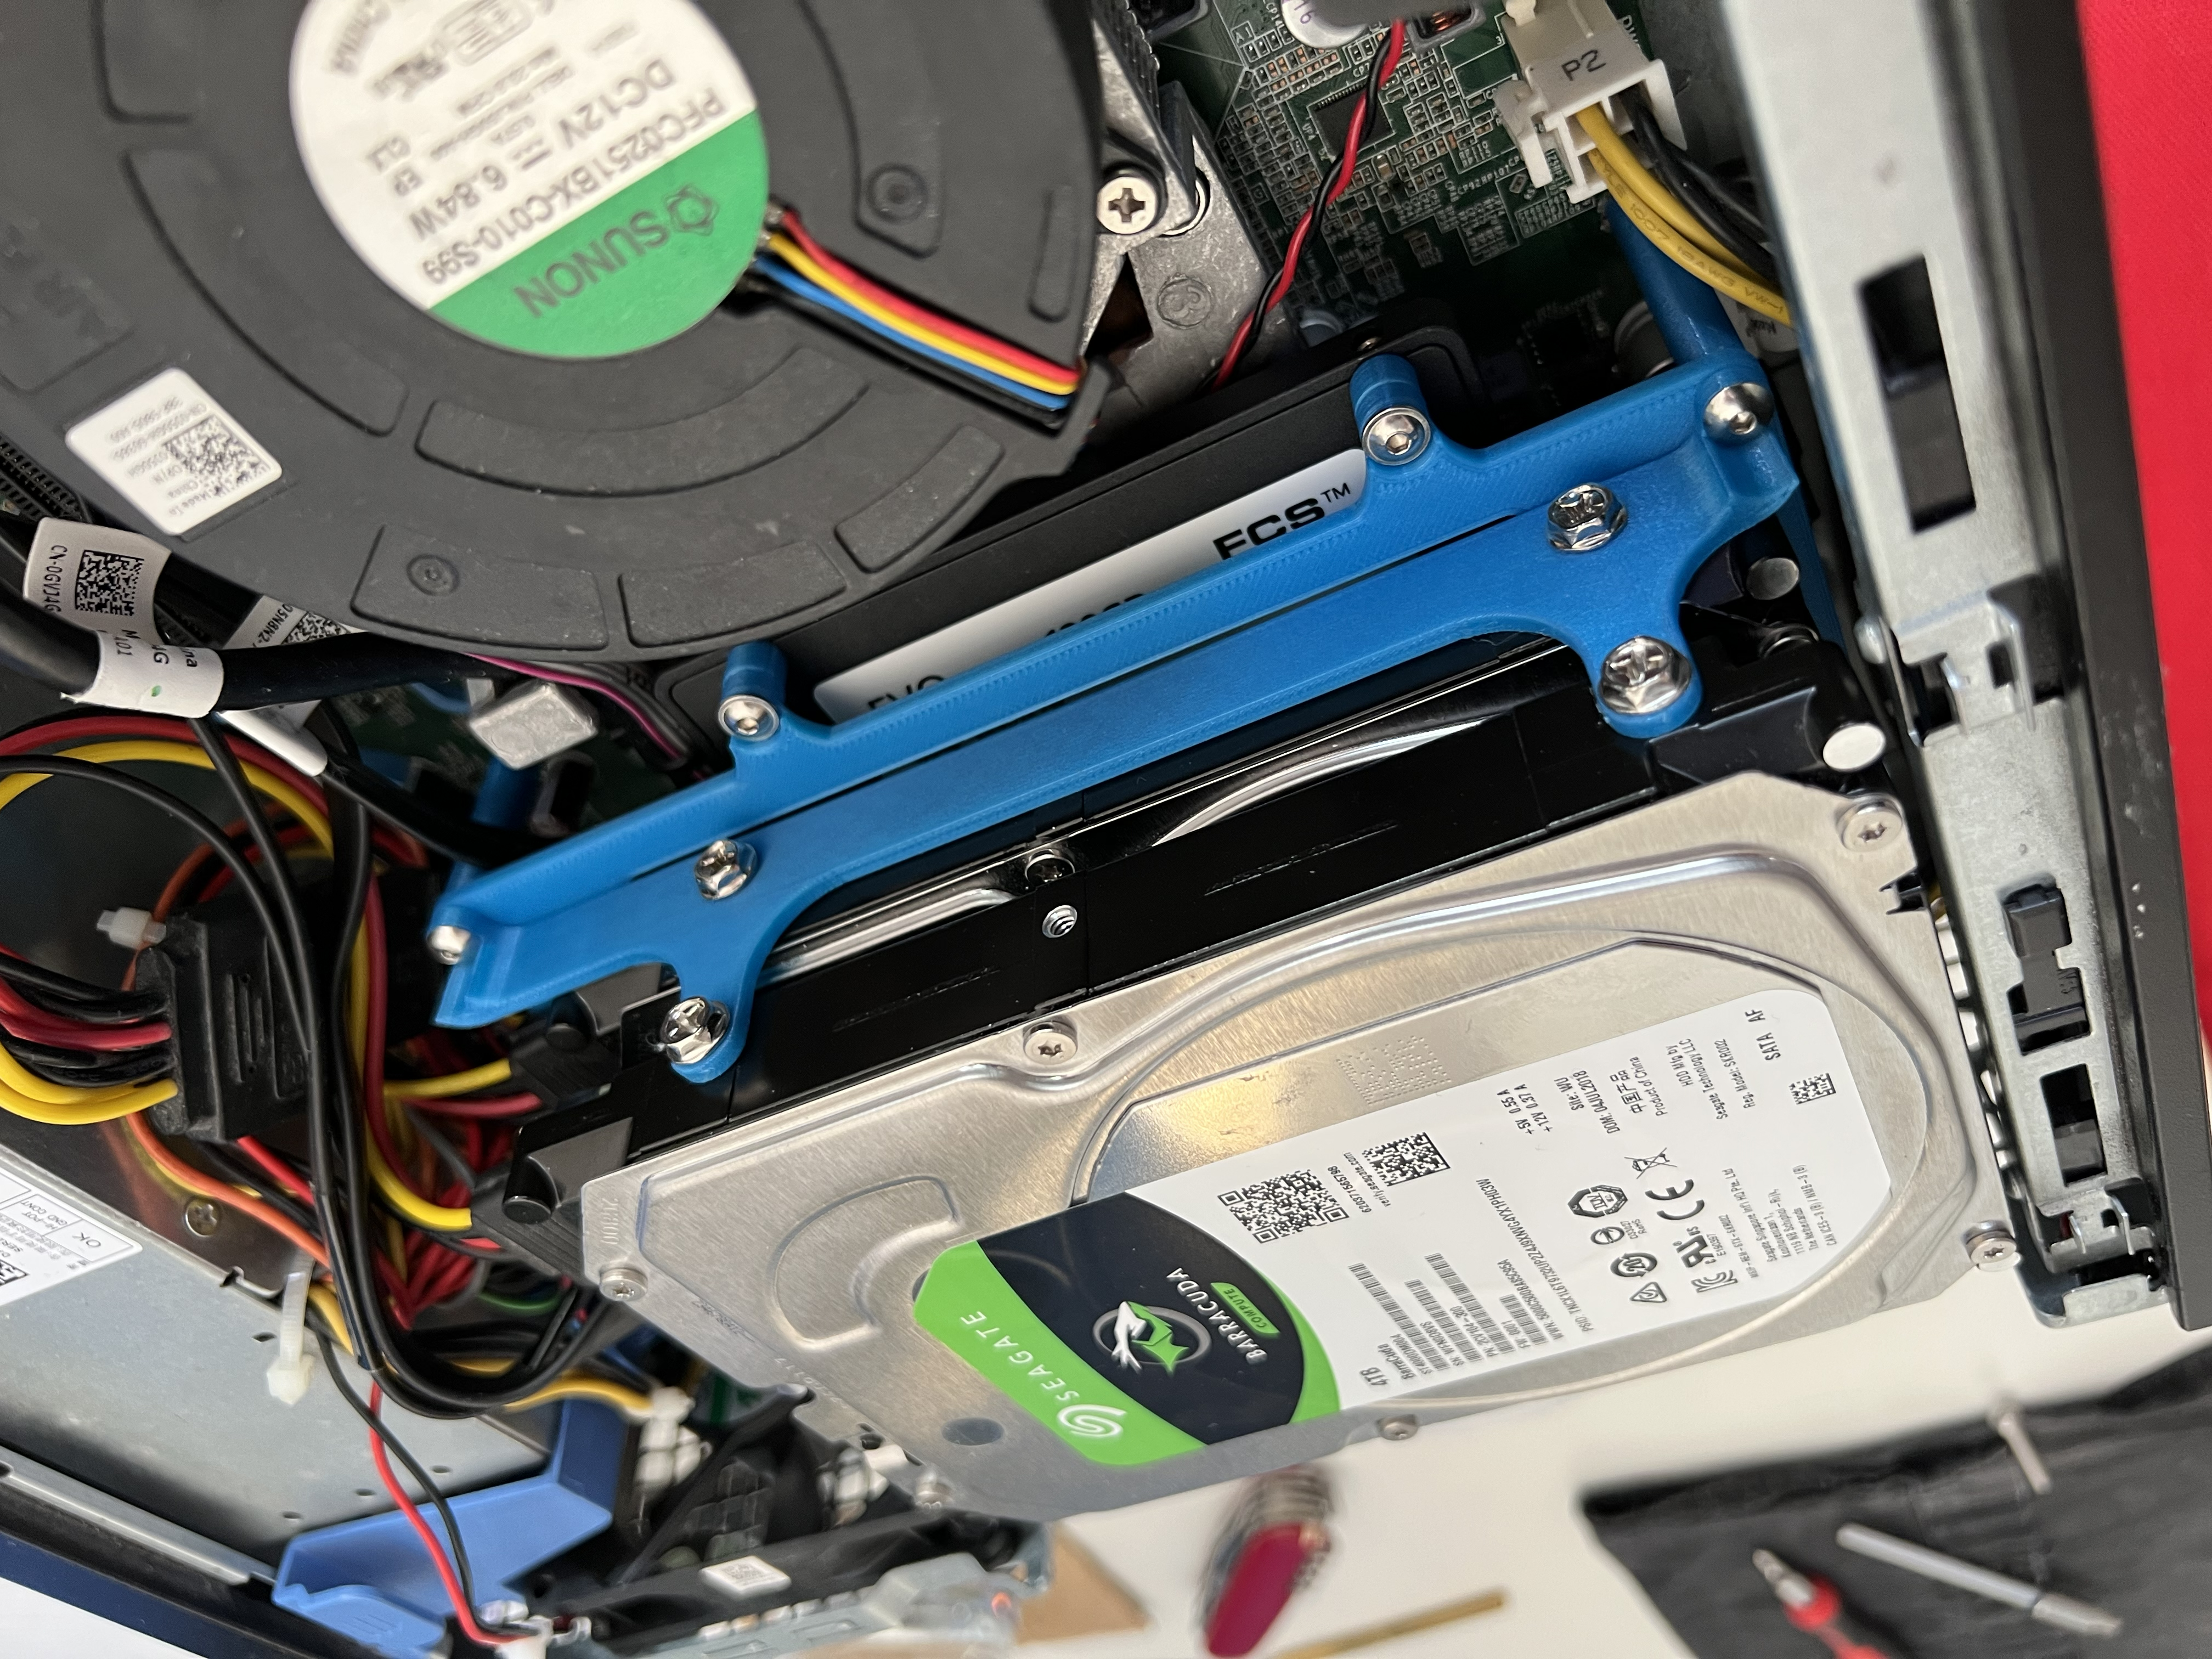 2 hard drives mounted on the fully assembled custom mount